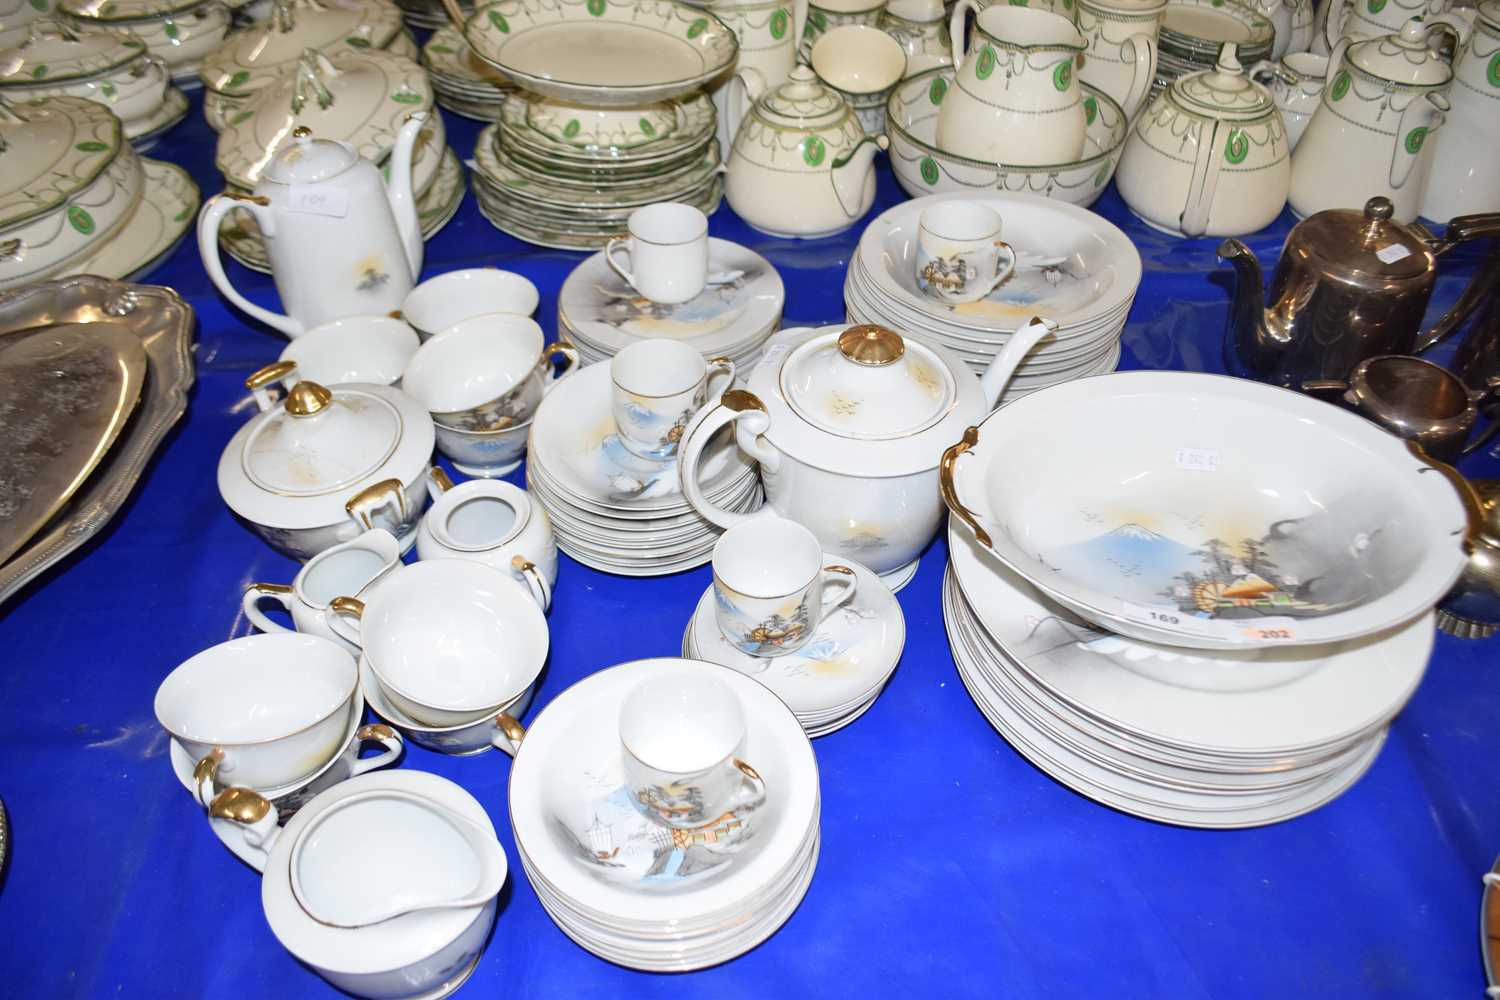 LARGE COLLECTION OF JAPANESE PORCELAIN TEA AND TABLE WARES